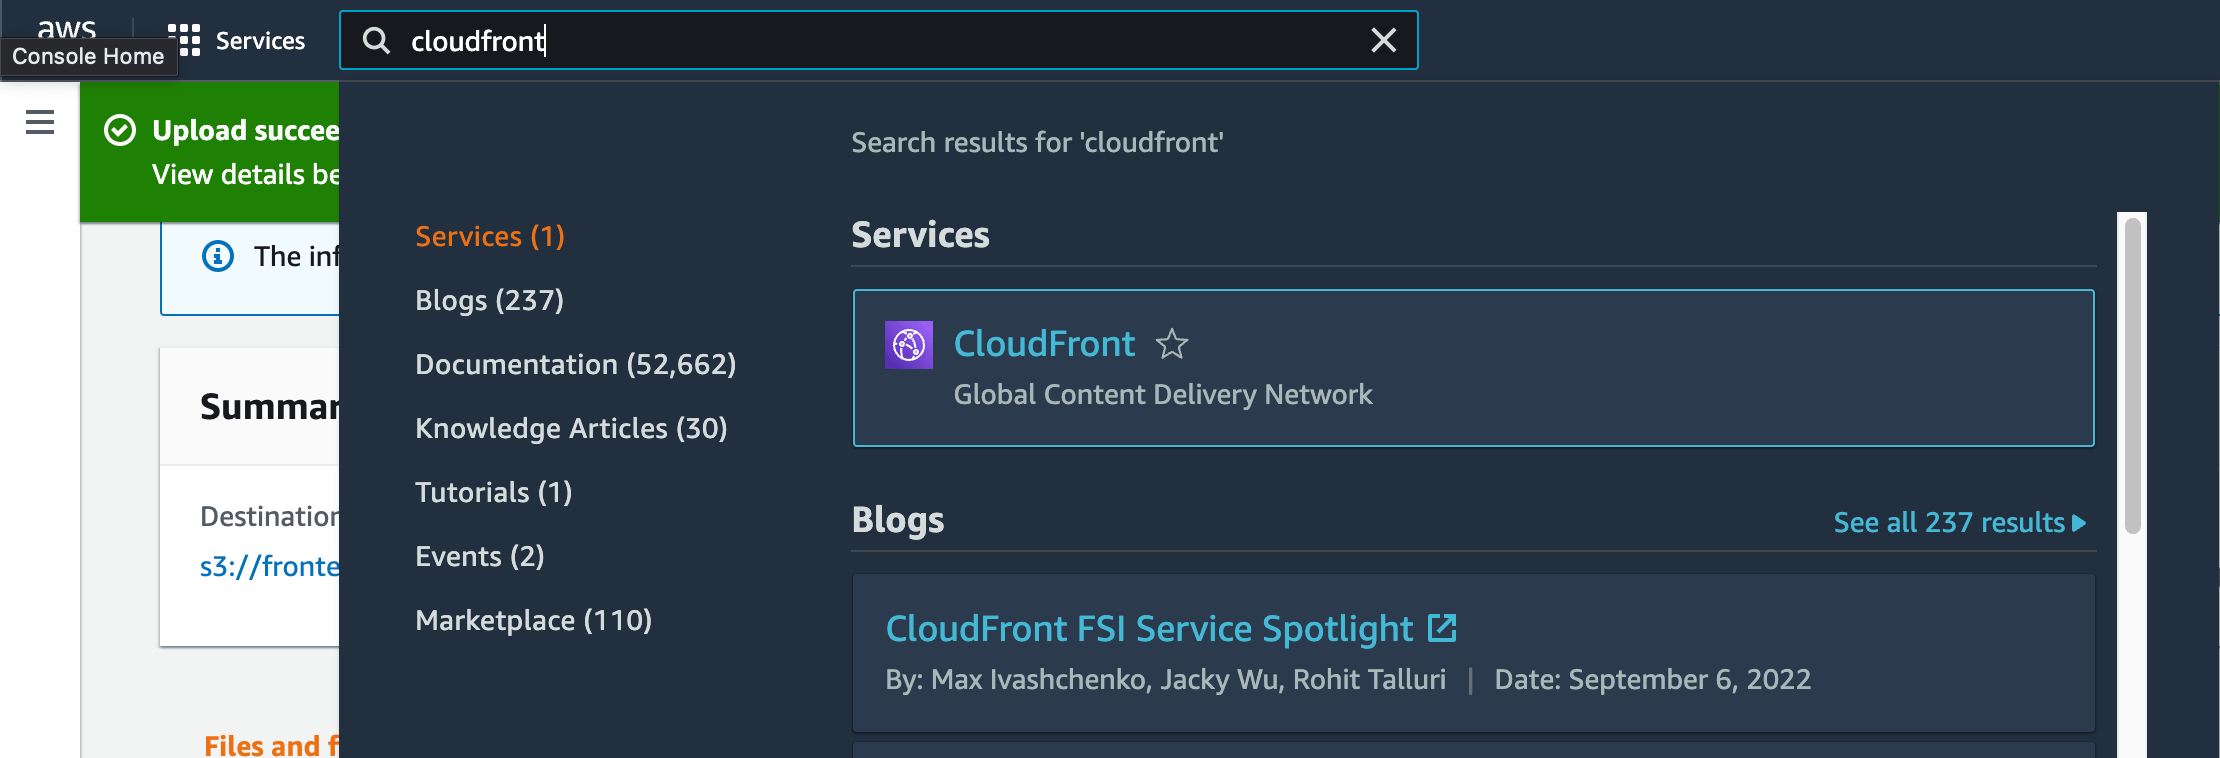 Search CloudFront